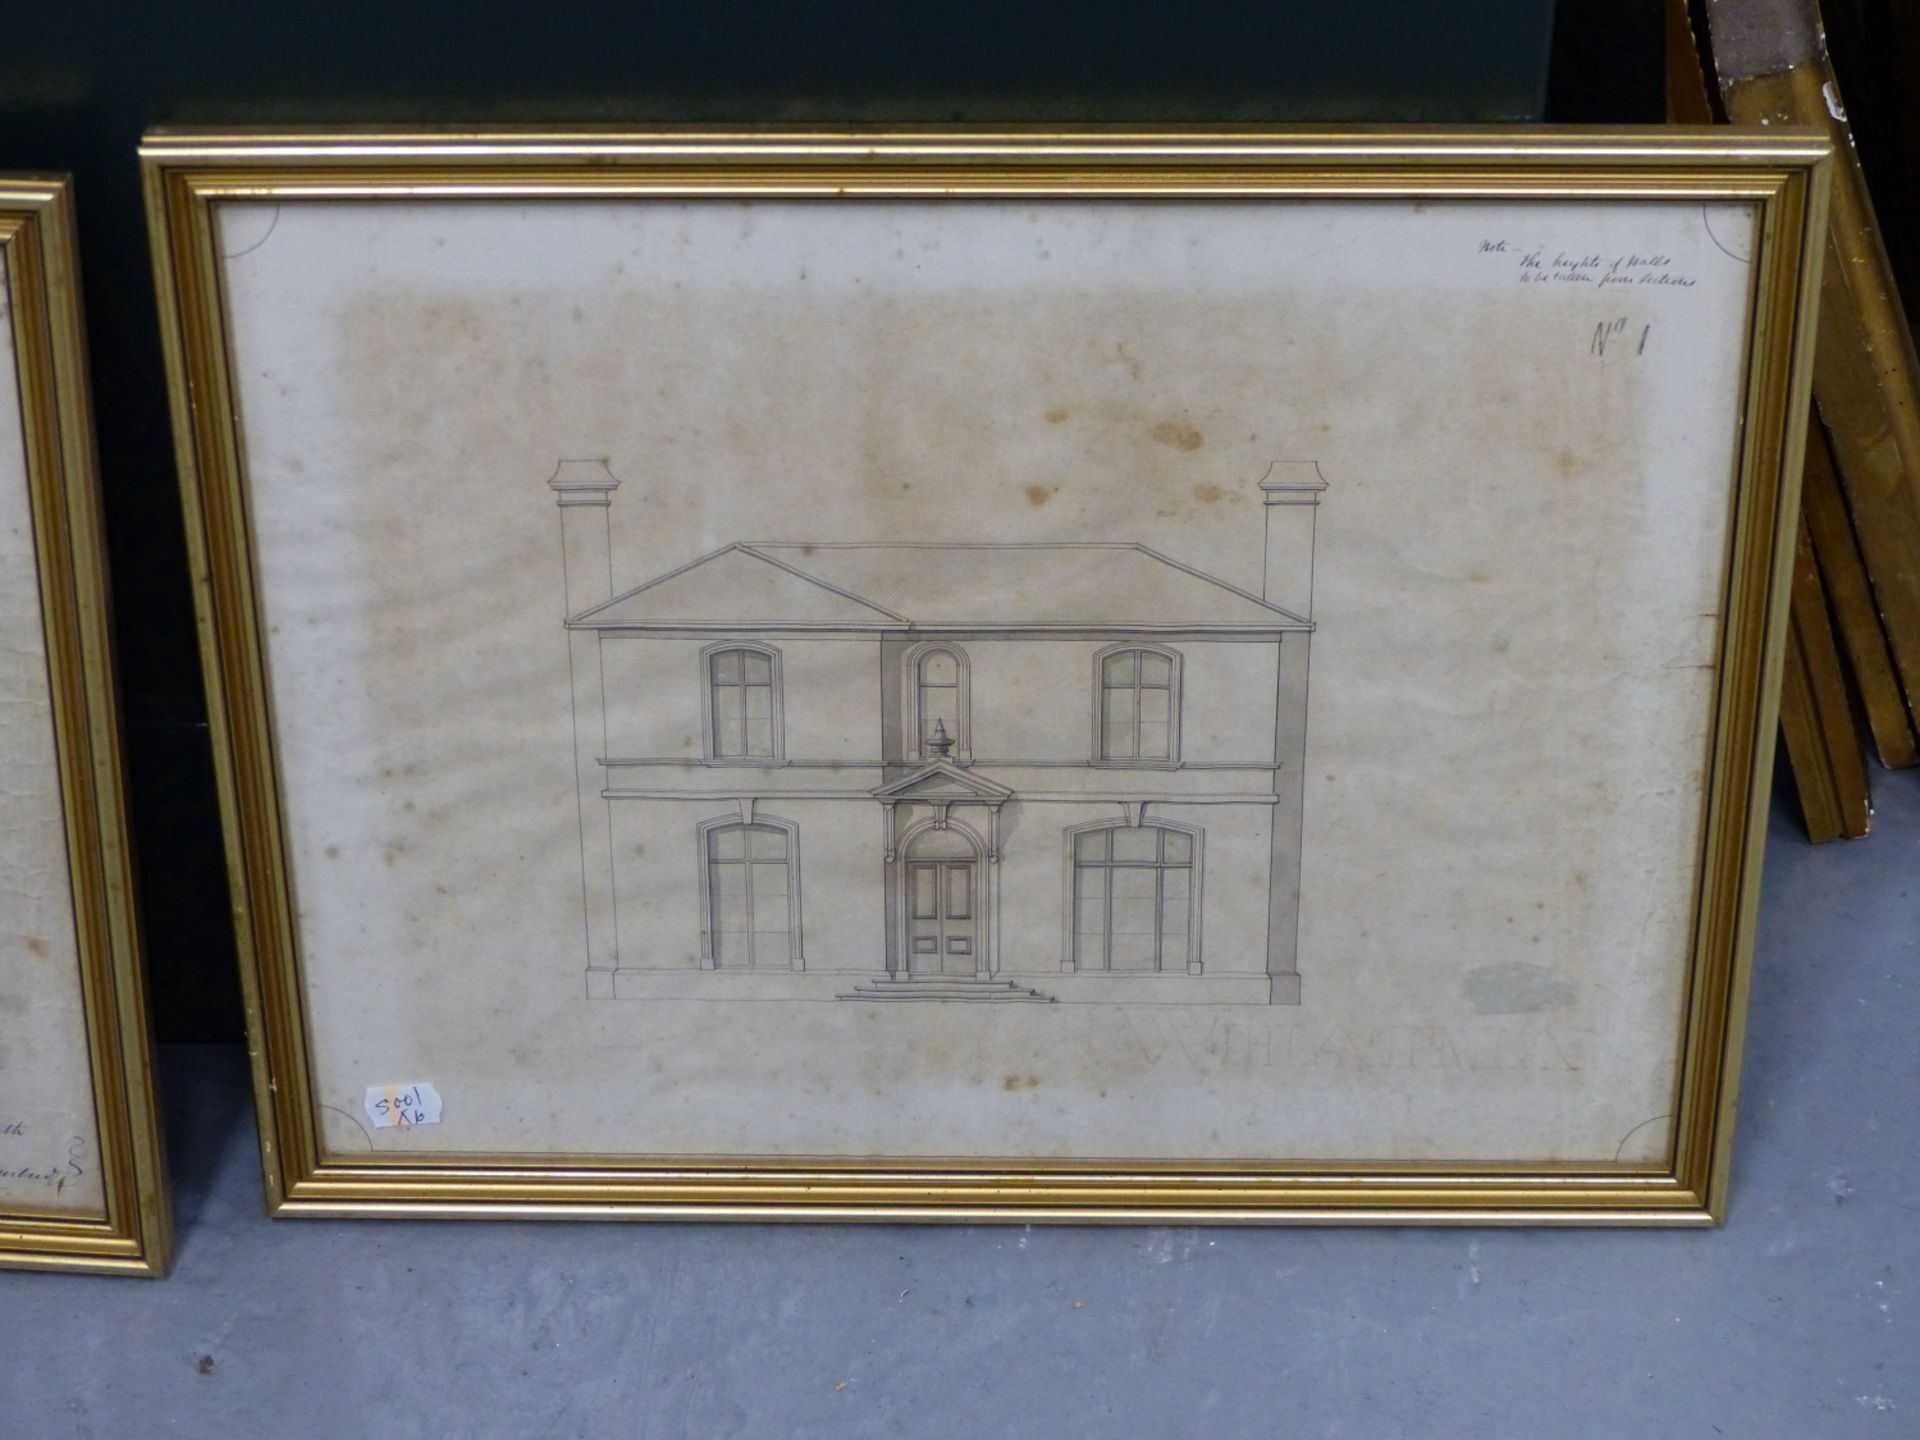 ARCHITECTURAL PLANS, AN INTERESTING SET OF MID 19TH CENTURY ARCHITECTS PLANS FOR AN IMPRESSIVE - Image 2 of 7